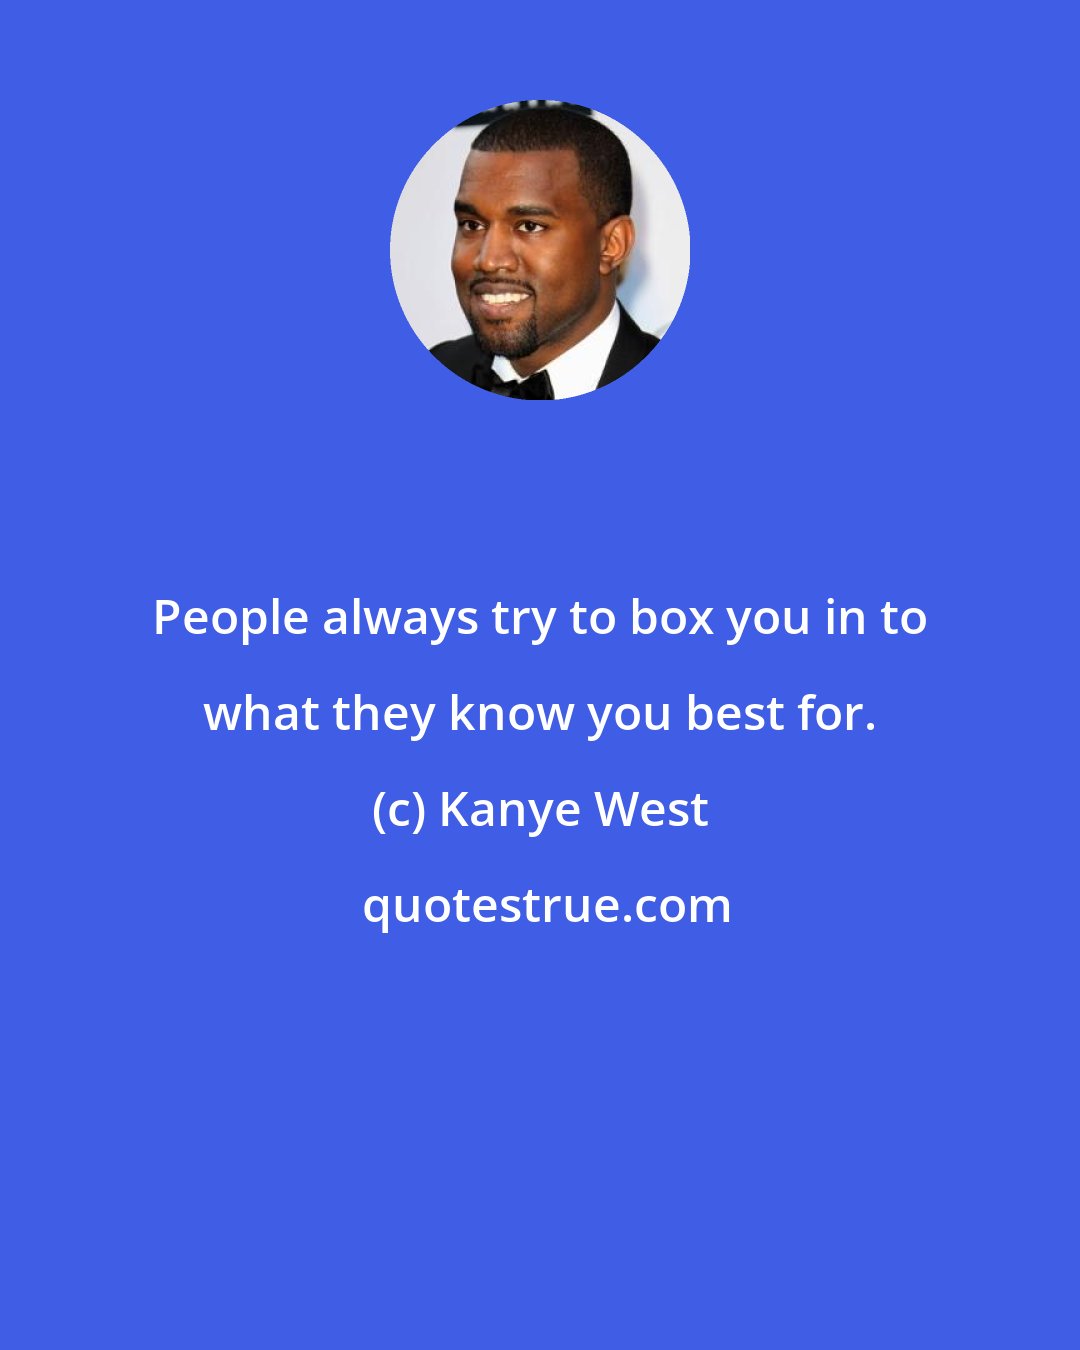 Kanye West: People always try to box you in to what they know you best for.